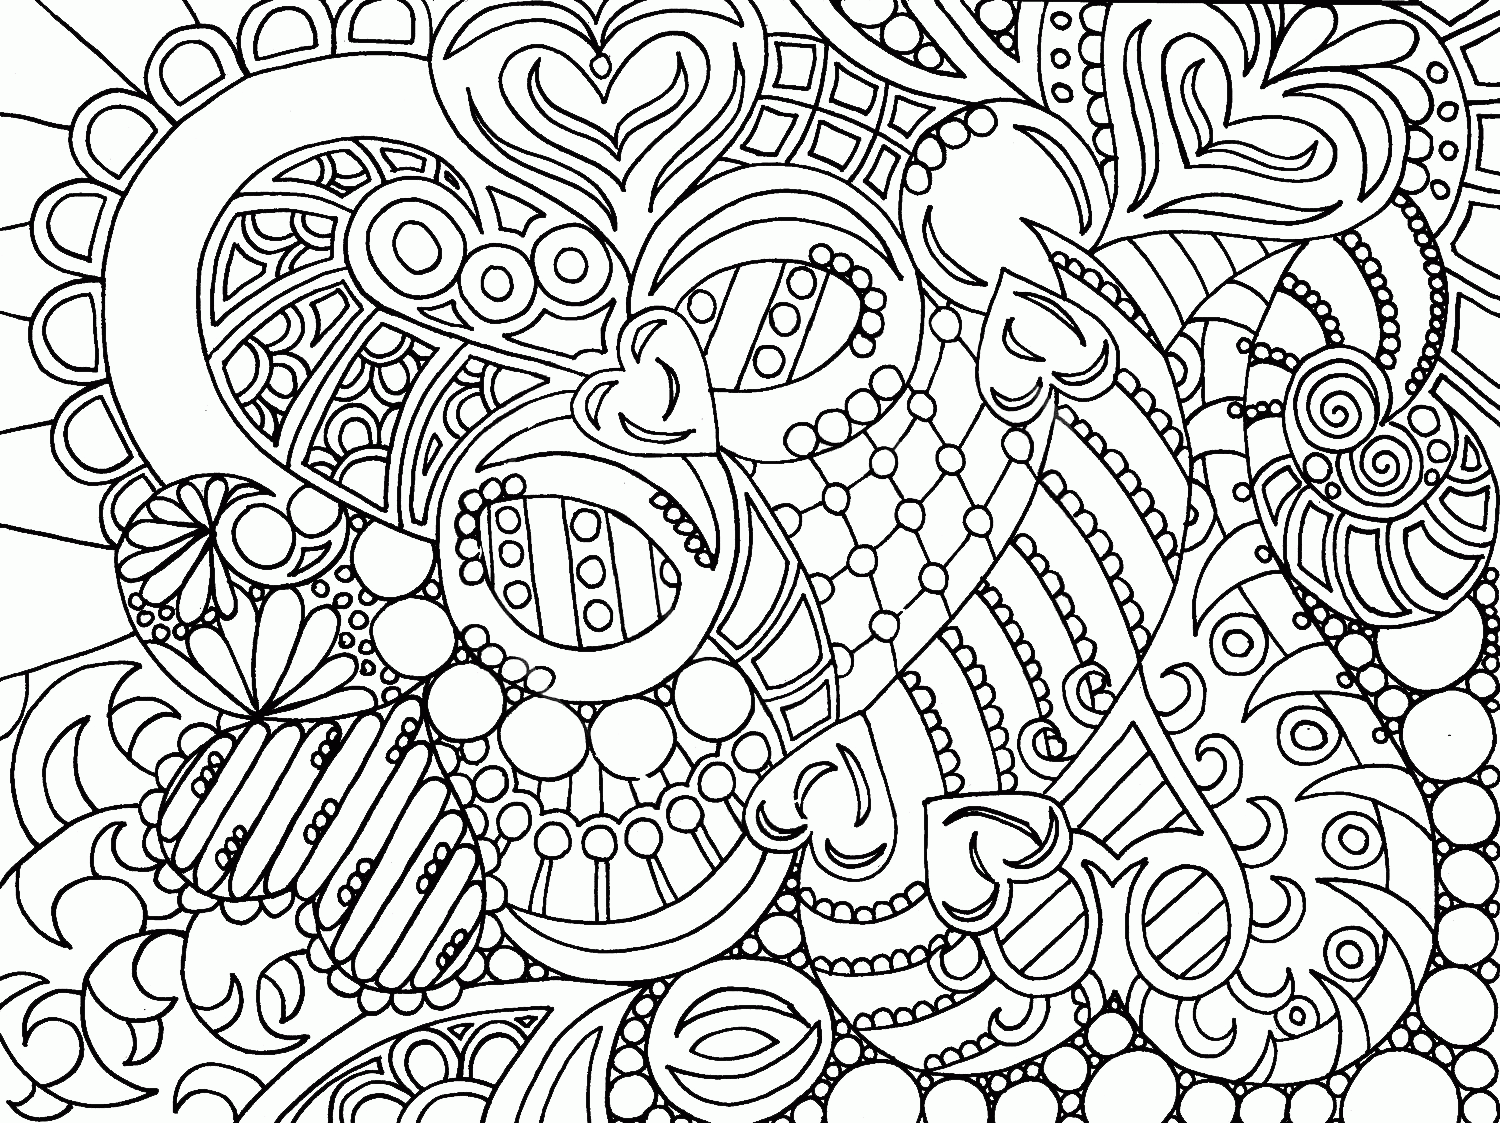 Adult Pattern Coloring Pages Printable - Coloring Pages For All Ages